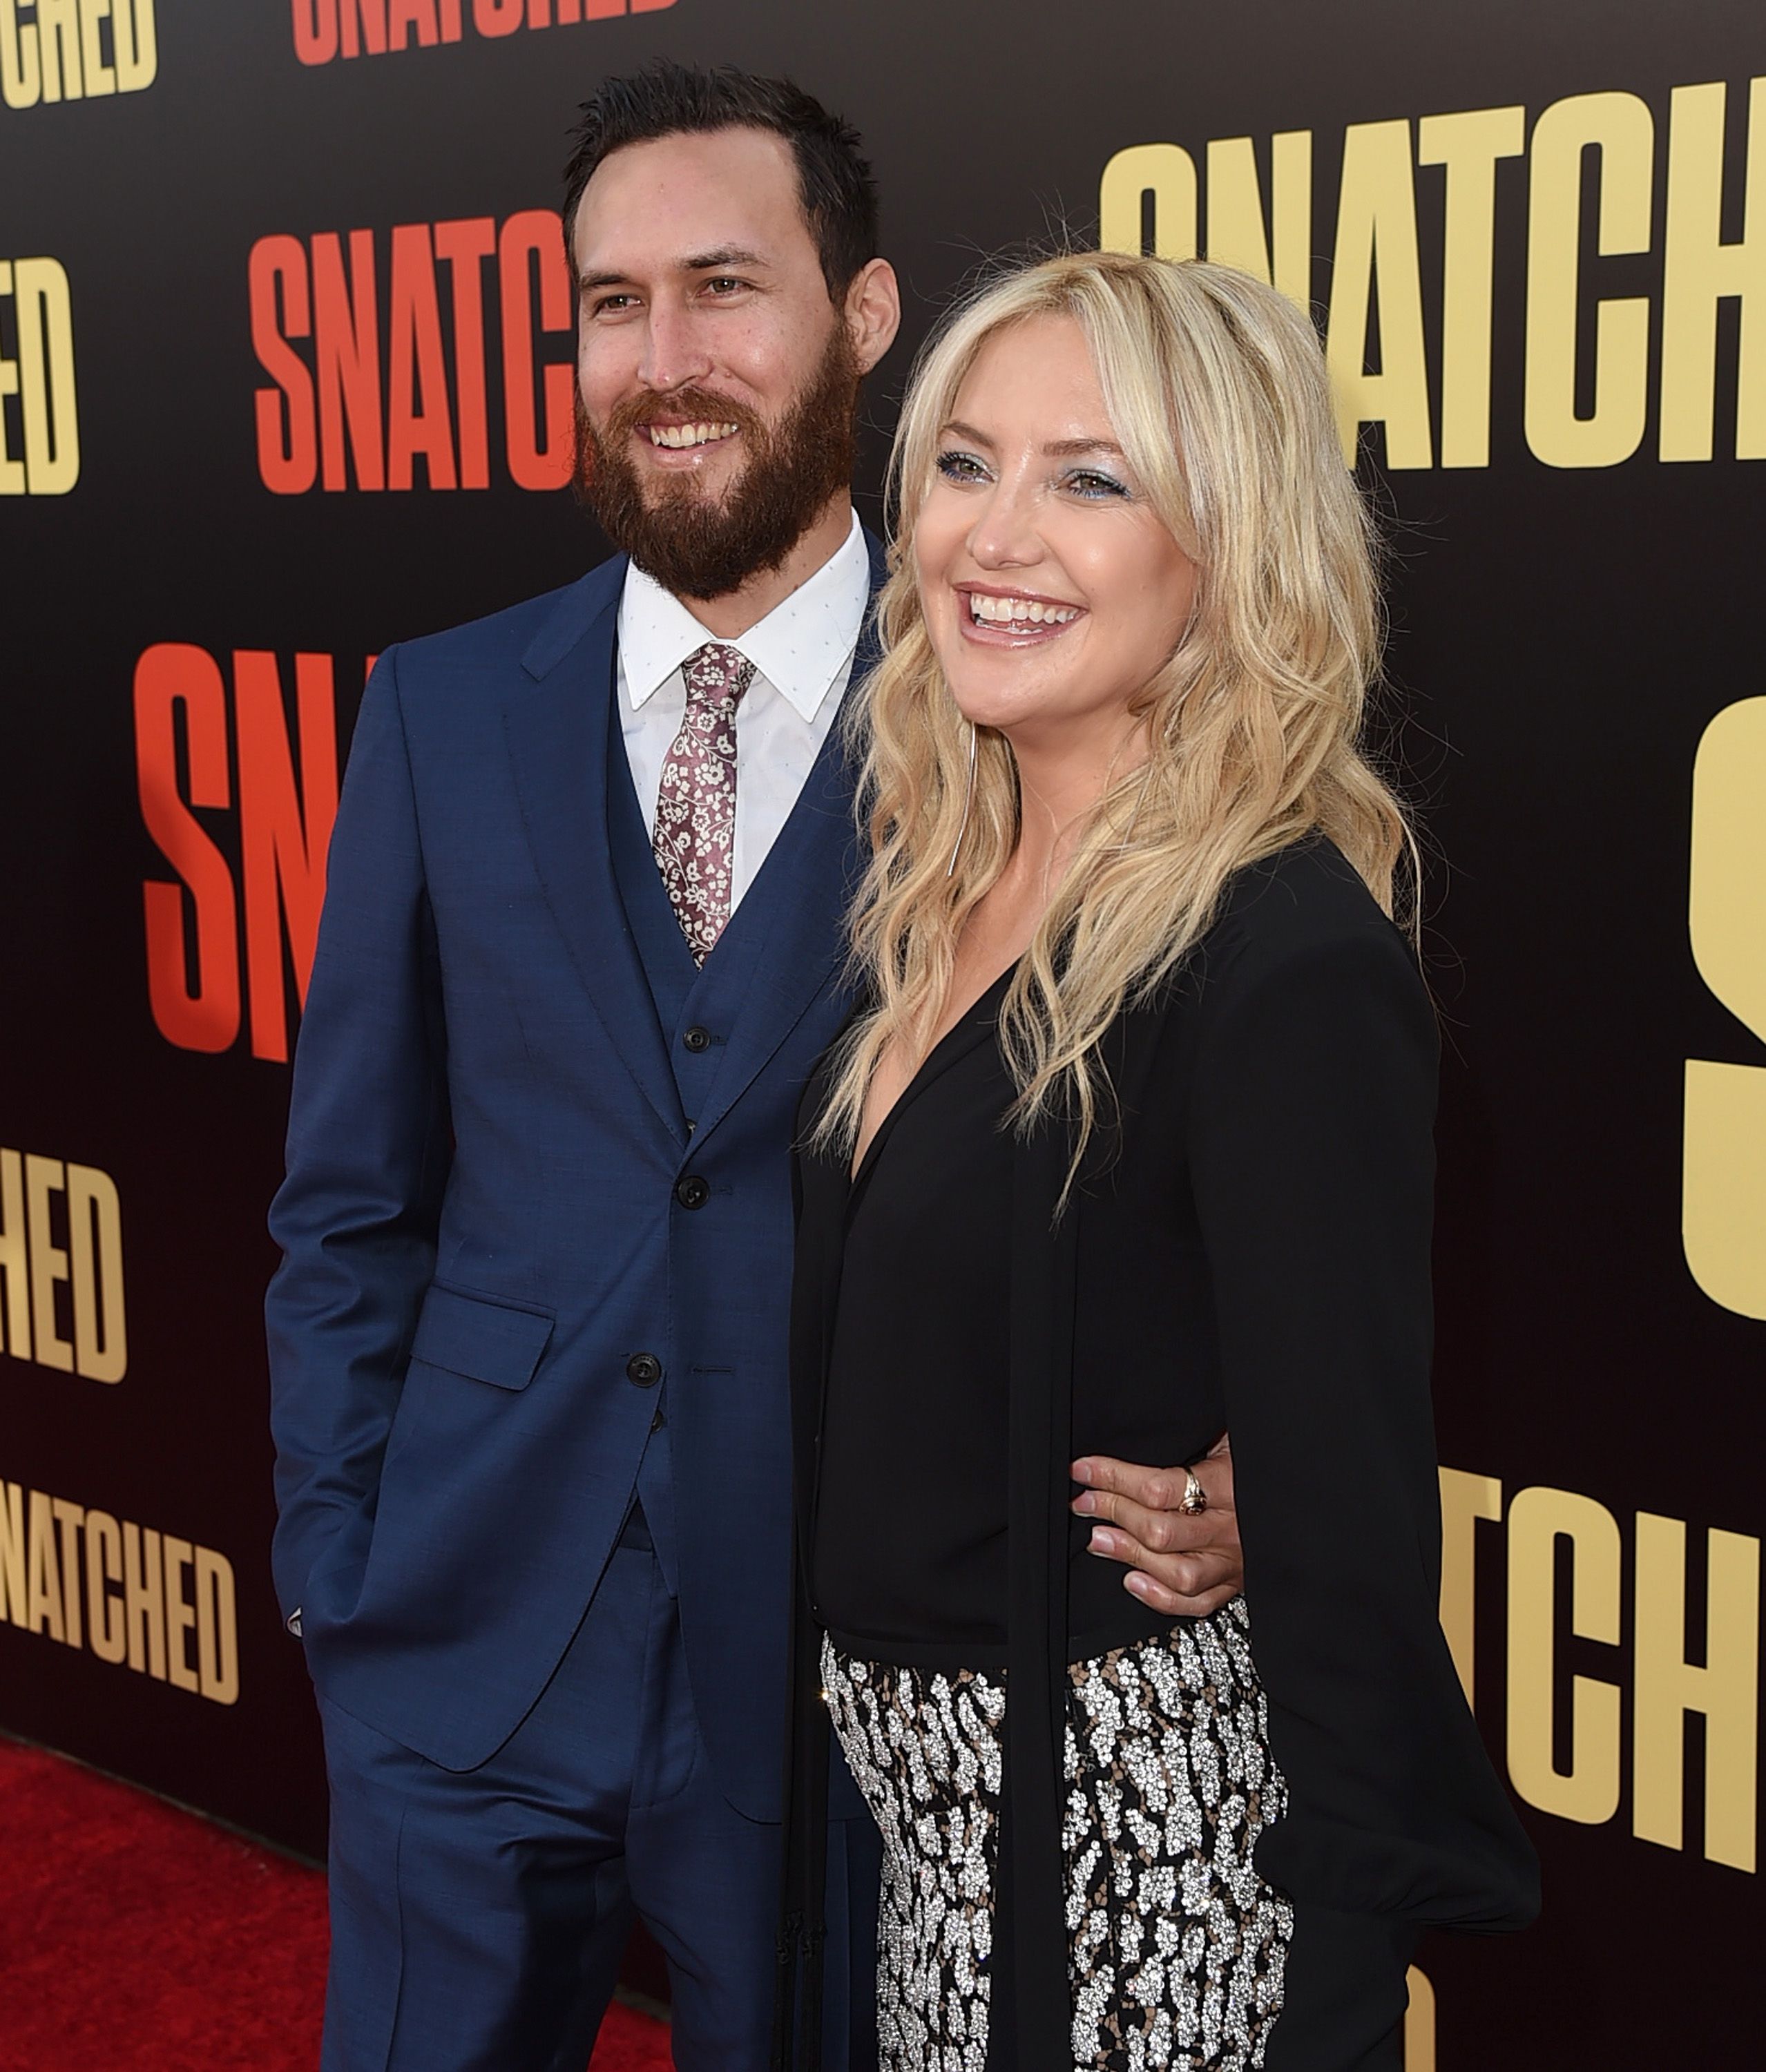 Danny Fujikawa and actor Kate Hudson at the premiere of "Snatched" at Regency Village Theatre on May 10, 2017 | Photo: Getty Images